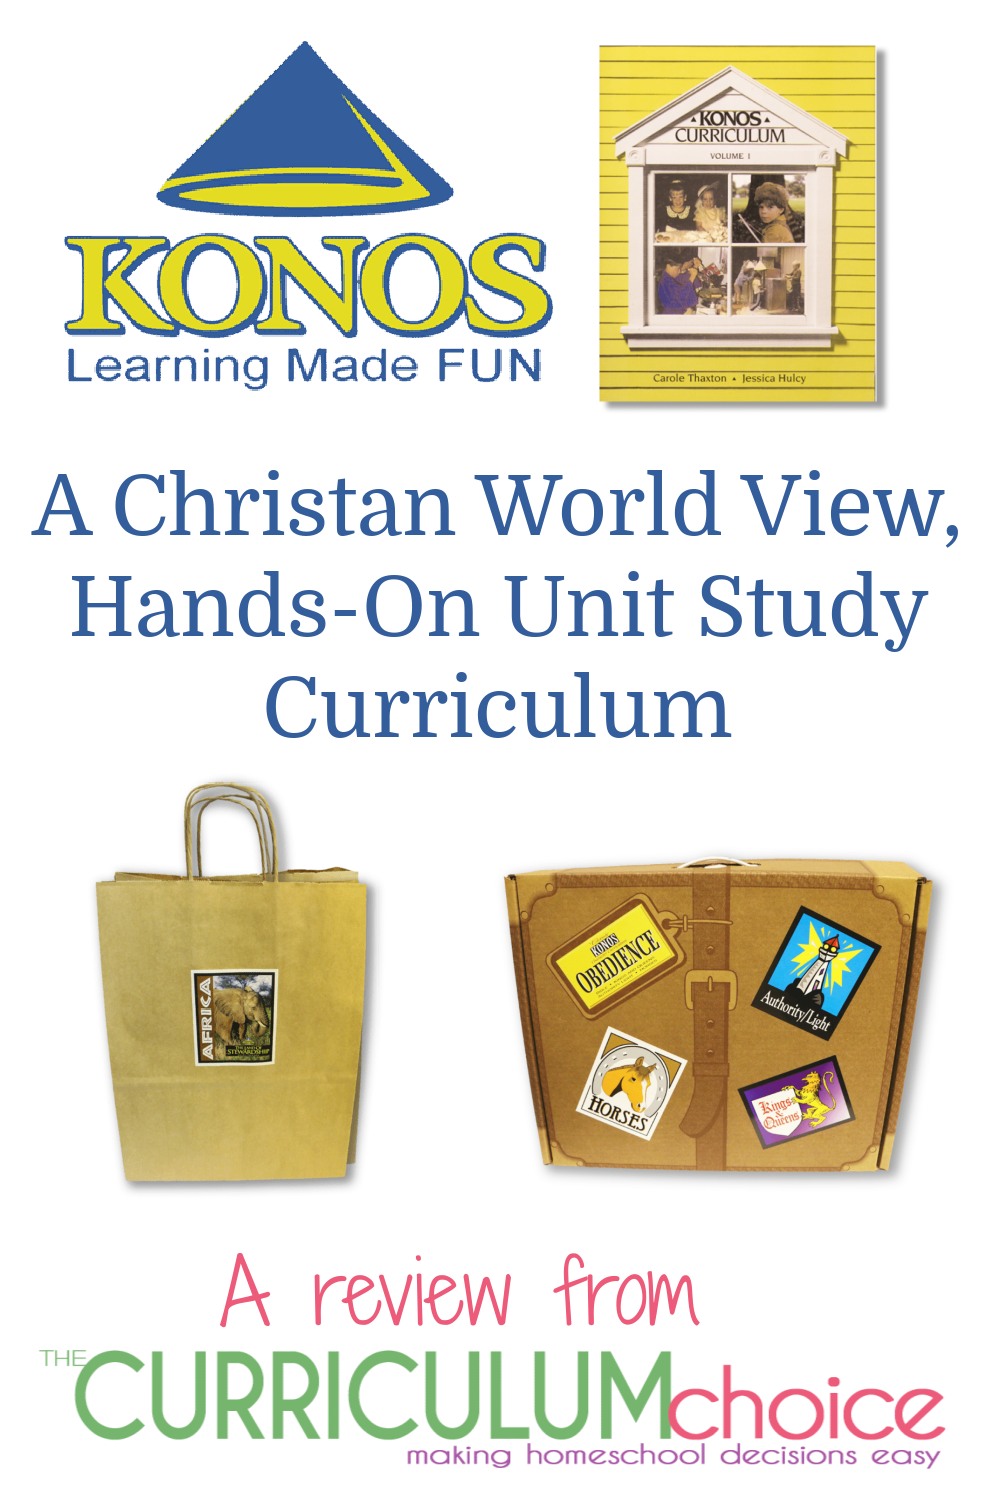 KONOS Unit Studies are organized into subjects (Godly character traits: patience, attentiveness, honor) and offer hands-on learning with a Christian worldview that are adaptable to all ages. They are a mix of learning all subjects under one topic with a myriad of fun activities to get kids up and discovering. A review from The Curriculum Choice